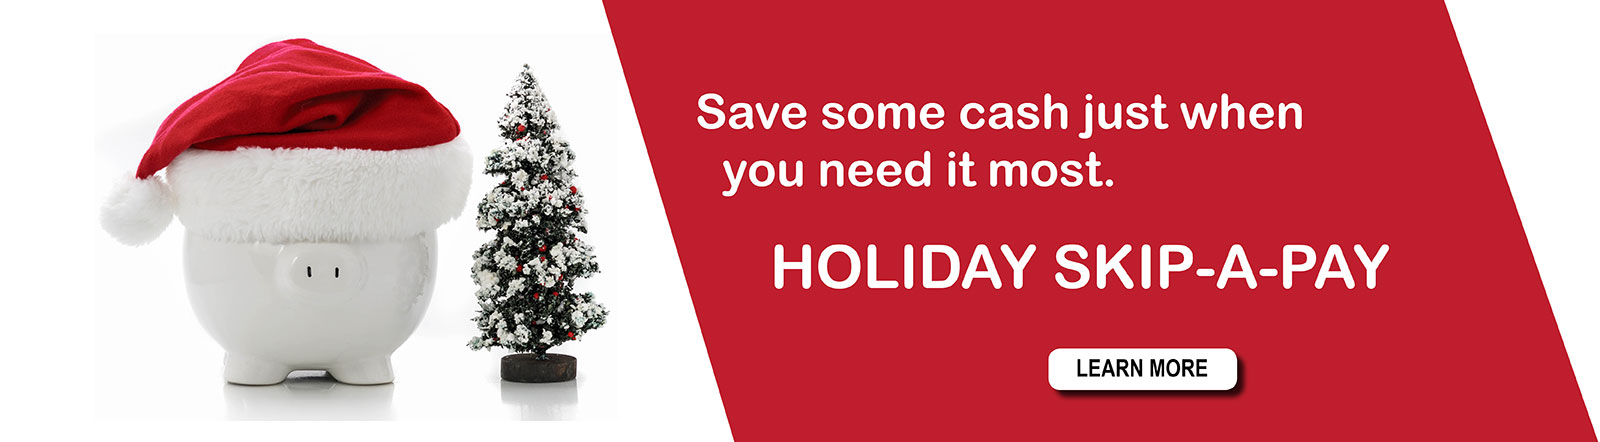 Save some cash just when you need it most with Holiday Skip-a-Pay.